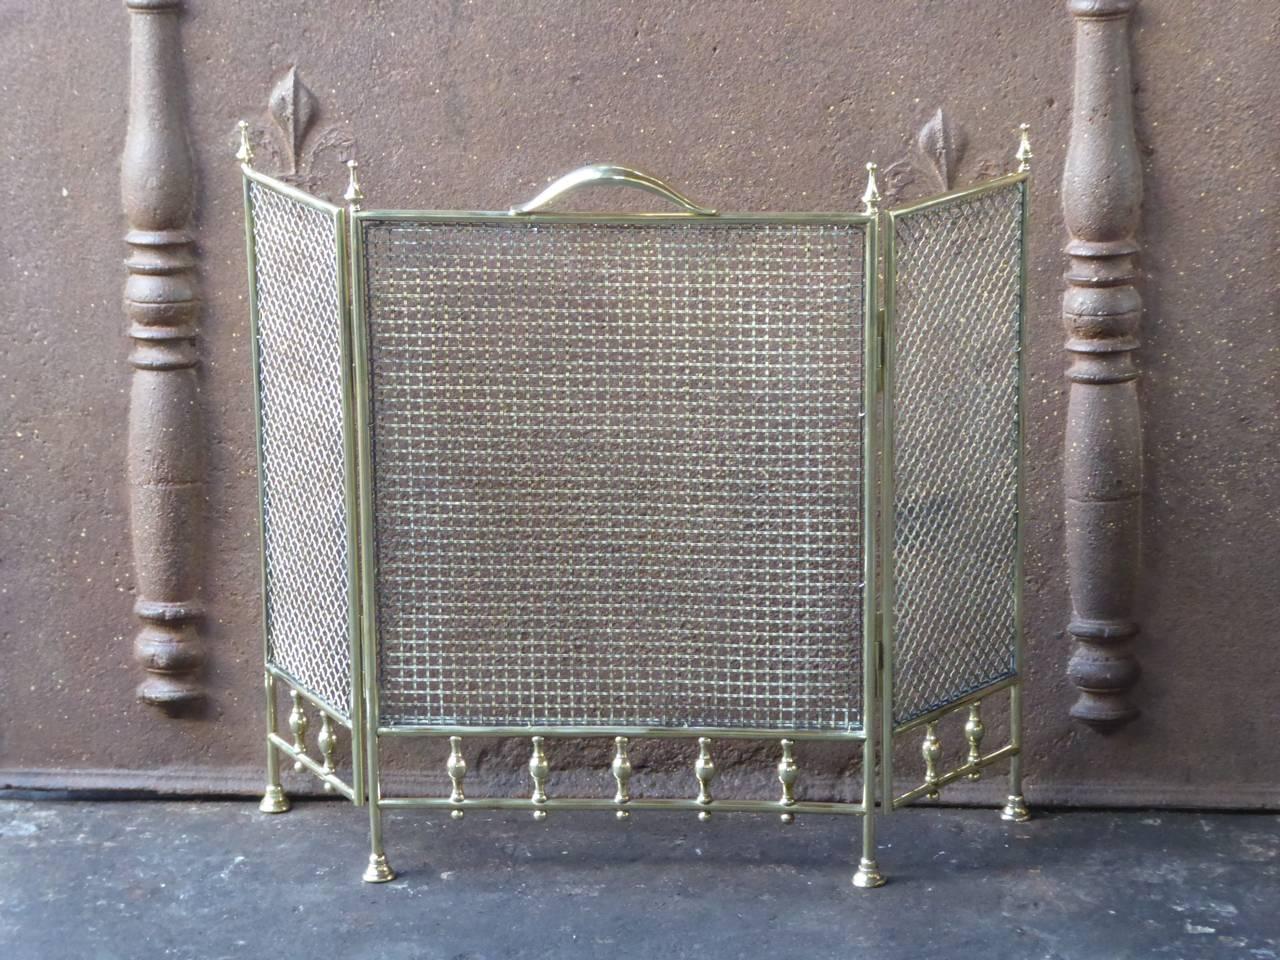 19th century English Victorian fireplace screen made of polished brass and iron mesh.

We have a unique and specialized collection of antique and used fireplace accessories consisting of more than 1000 listings at 1stdibs. Amongst others, we always